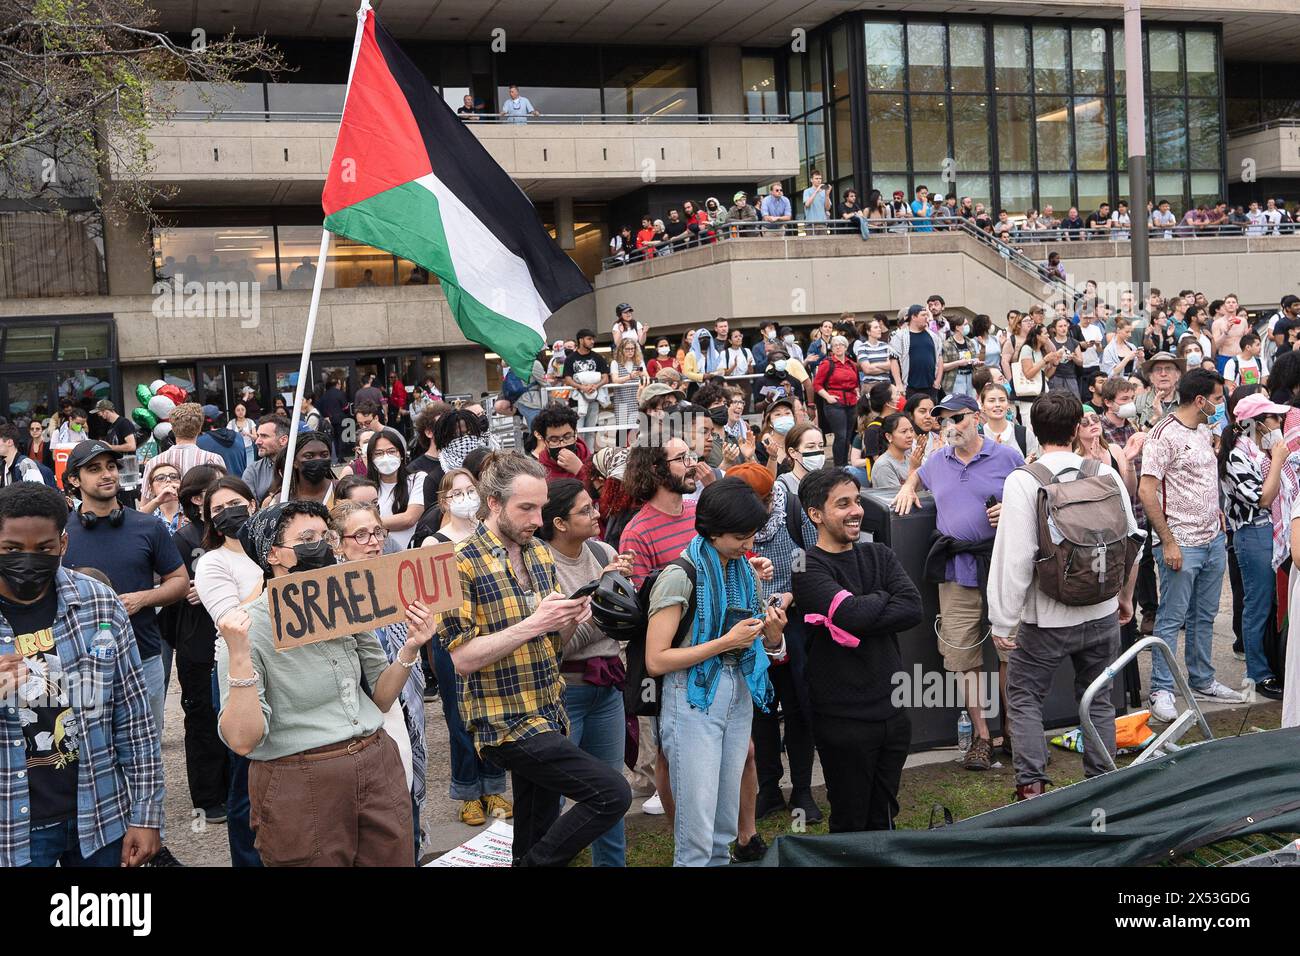 A large crowd stands outside the MIT pro-Palestine encampment during the rally. Rallies continue at the Massachusetts Institute of Technology, or MIT, campus now three weeks since the pro-Palestine protesters started an encampment. Student protesters are demanding that MIT divest all involvement from the Israeli military and businesses that have ties with the ongoing war in Gaza. On May 6, 2024, MIT President Sally Kornbluth gave students a 2:30 PM EST deadline to leave the encampment or face school suspension. While a half dozen students remained in the encampment, a rally grew in size outsid Stock Photo